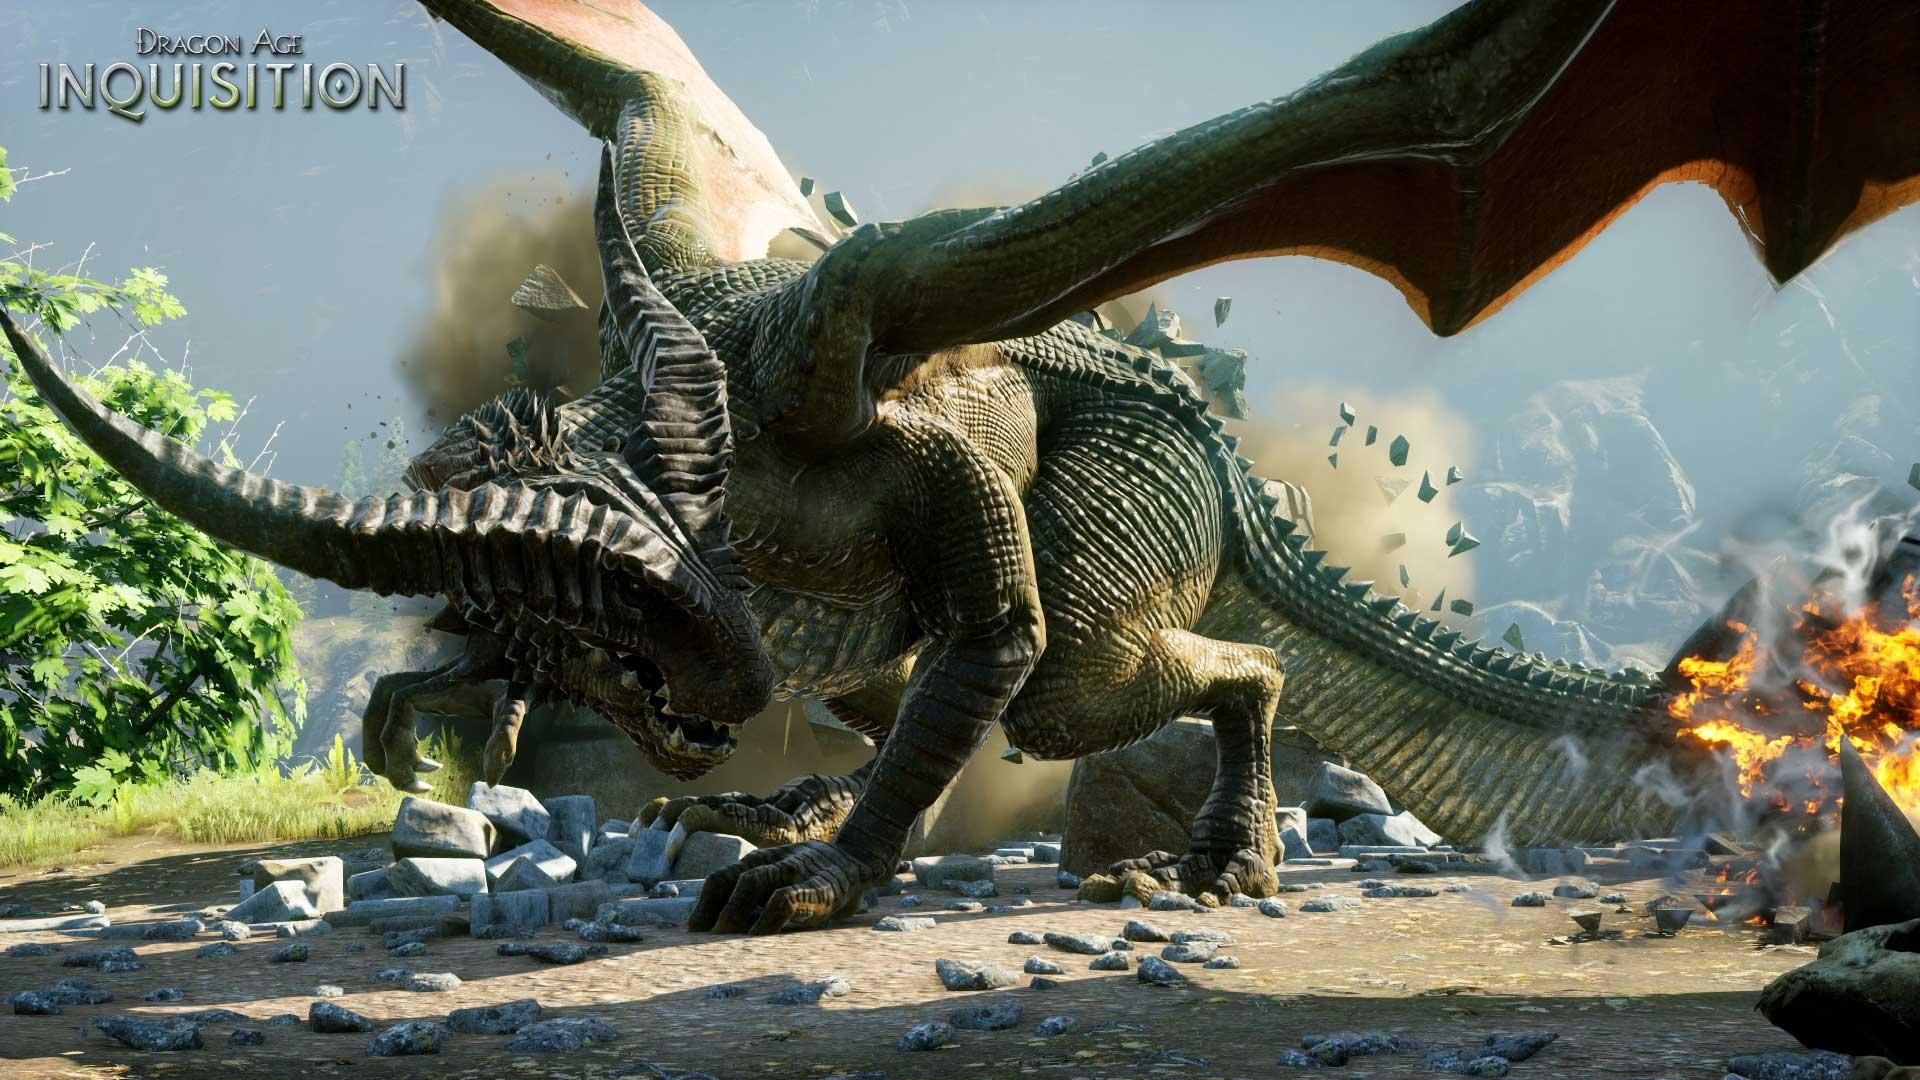 Dragon Age: Inquisition Will Have Four Player Co-op